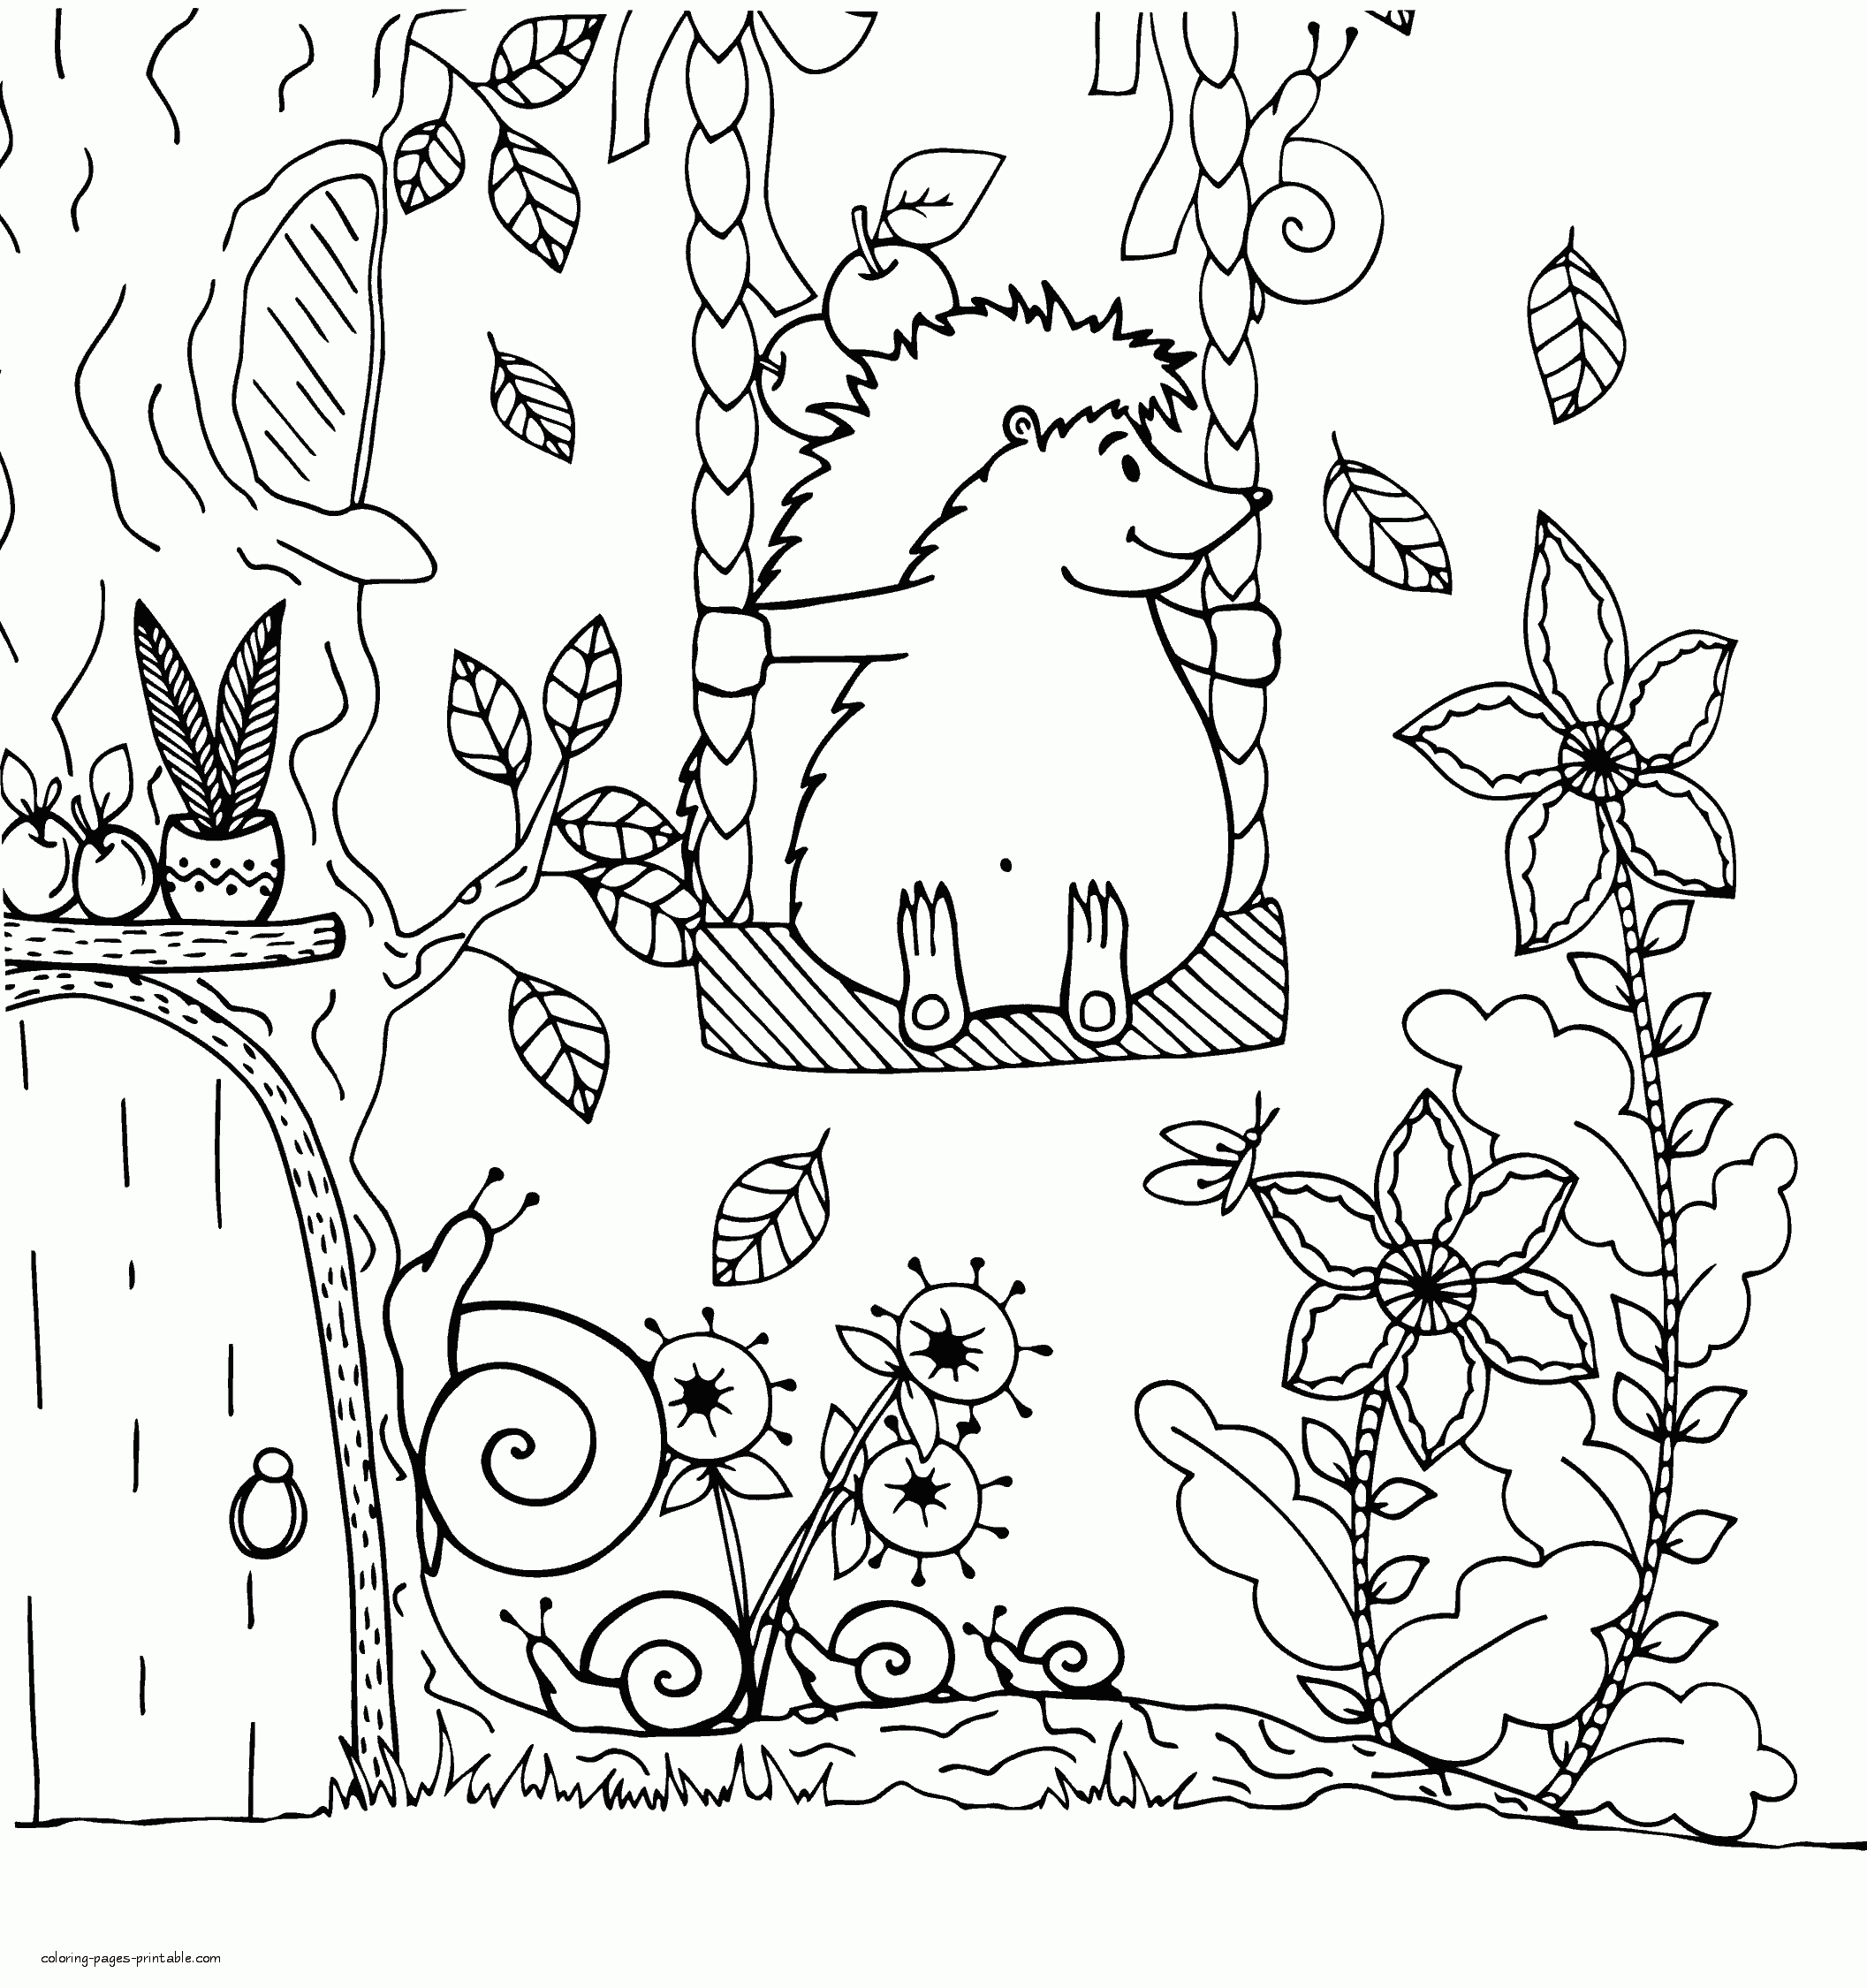 Printable Hedgehog Coloring Page For Free